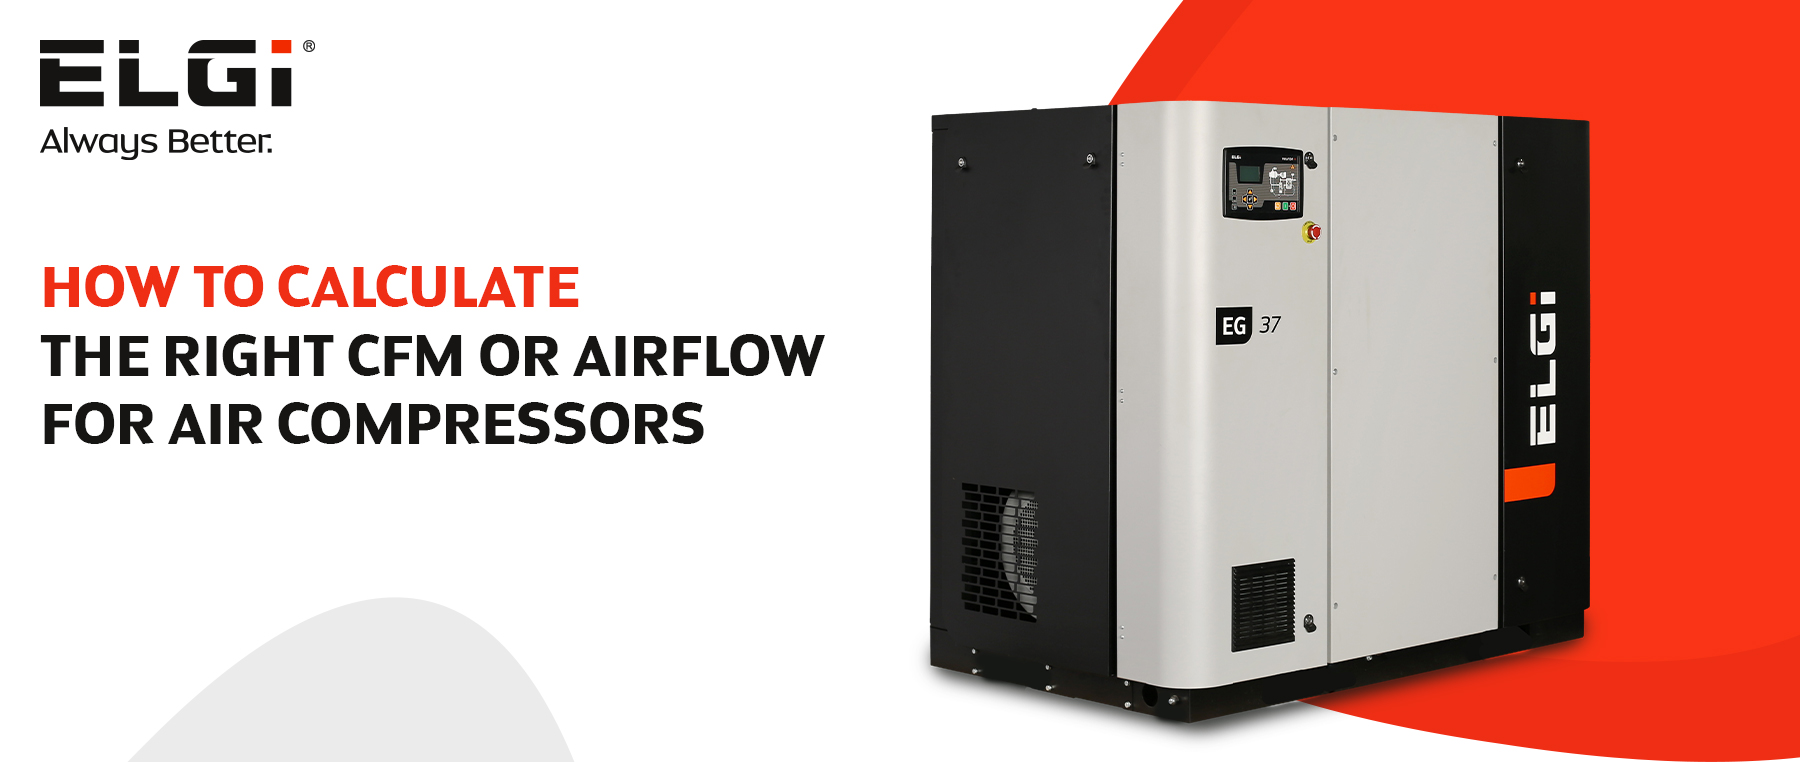 How to calculate the right CFM or airflow for air compressors